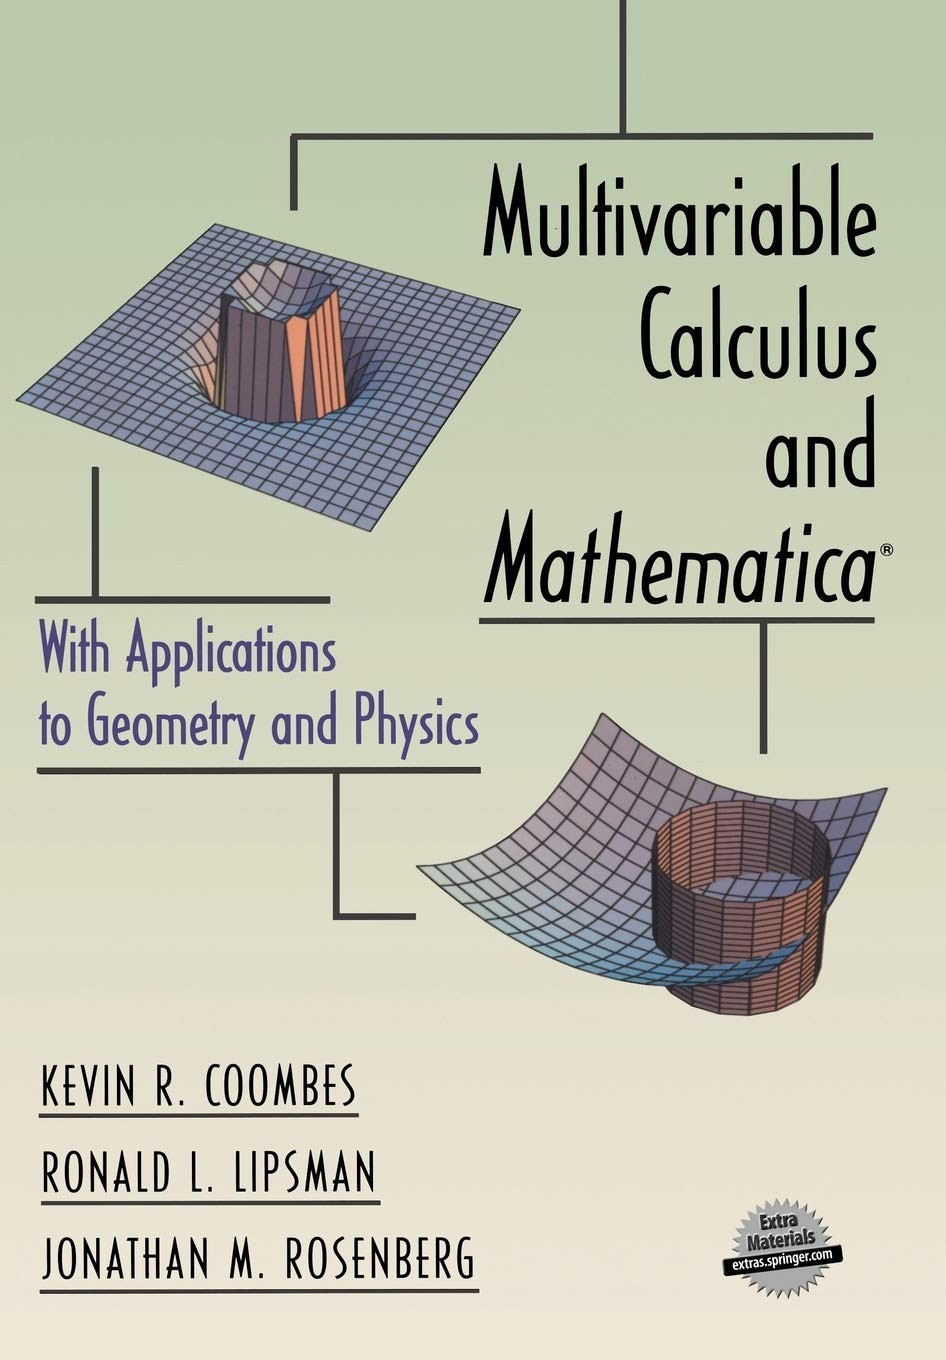 Multivariable Calculus and Mathematica®: with Applications to Geometry and Physics